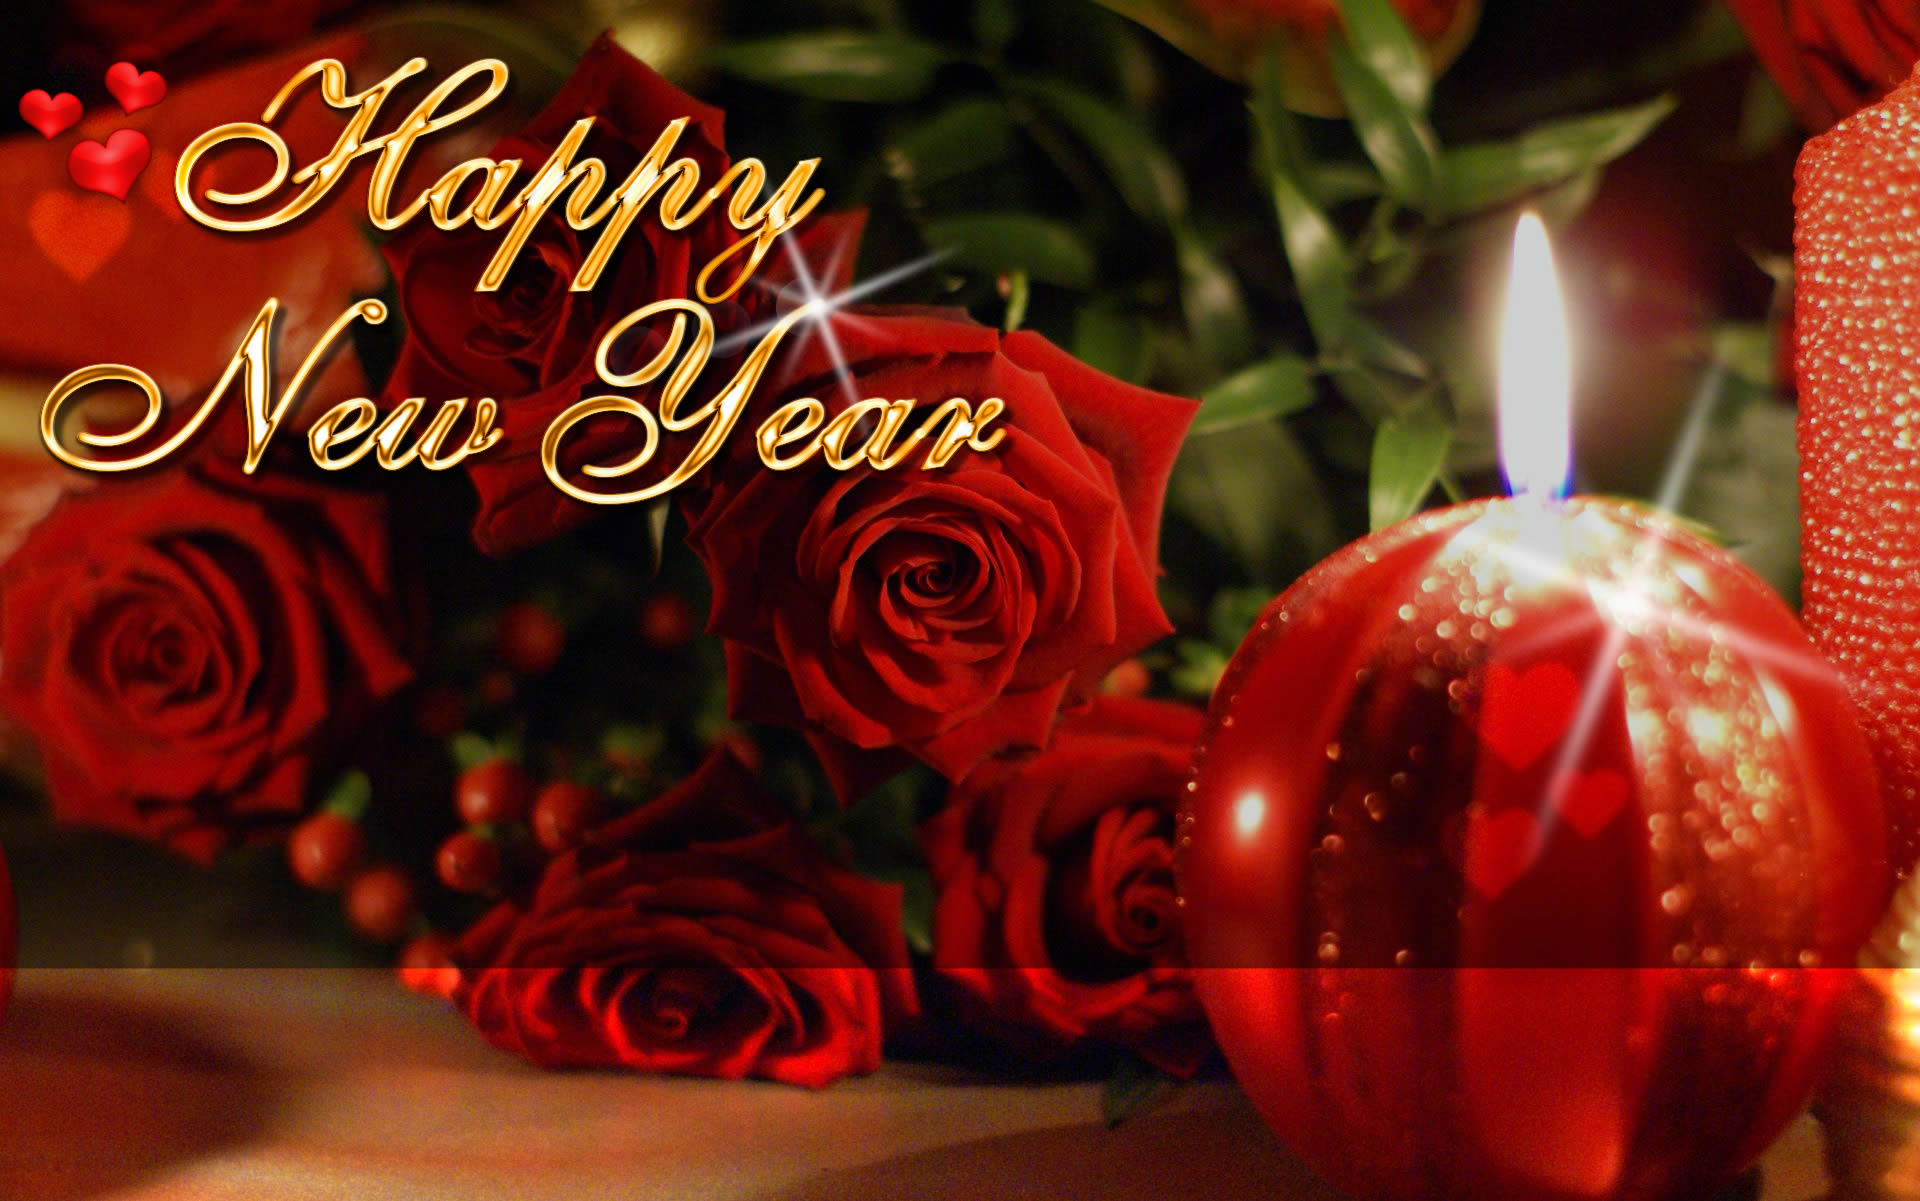 Happy New Year   Wallpapers Pictures Pics Images Photos Desktop 1920x1201